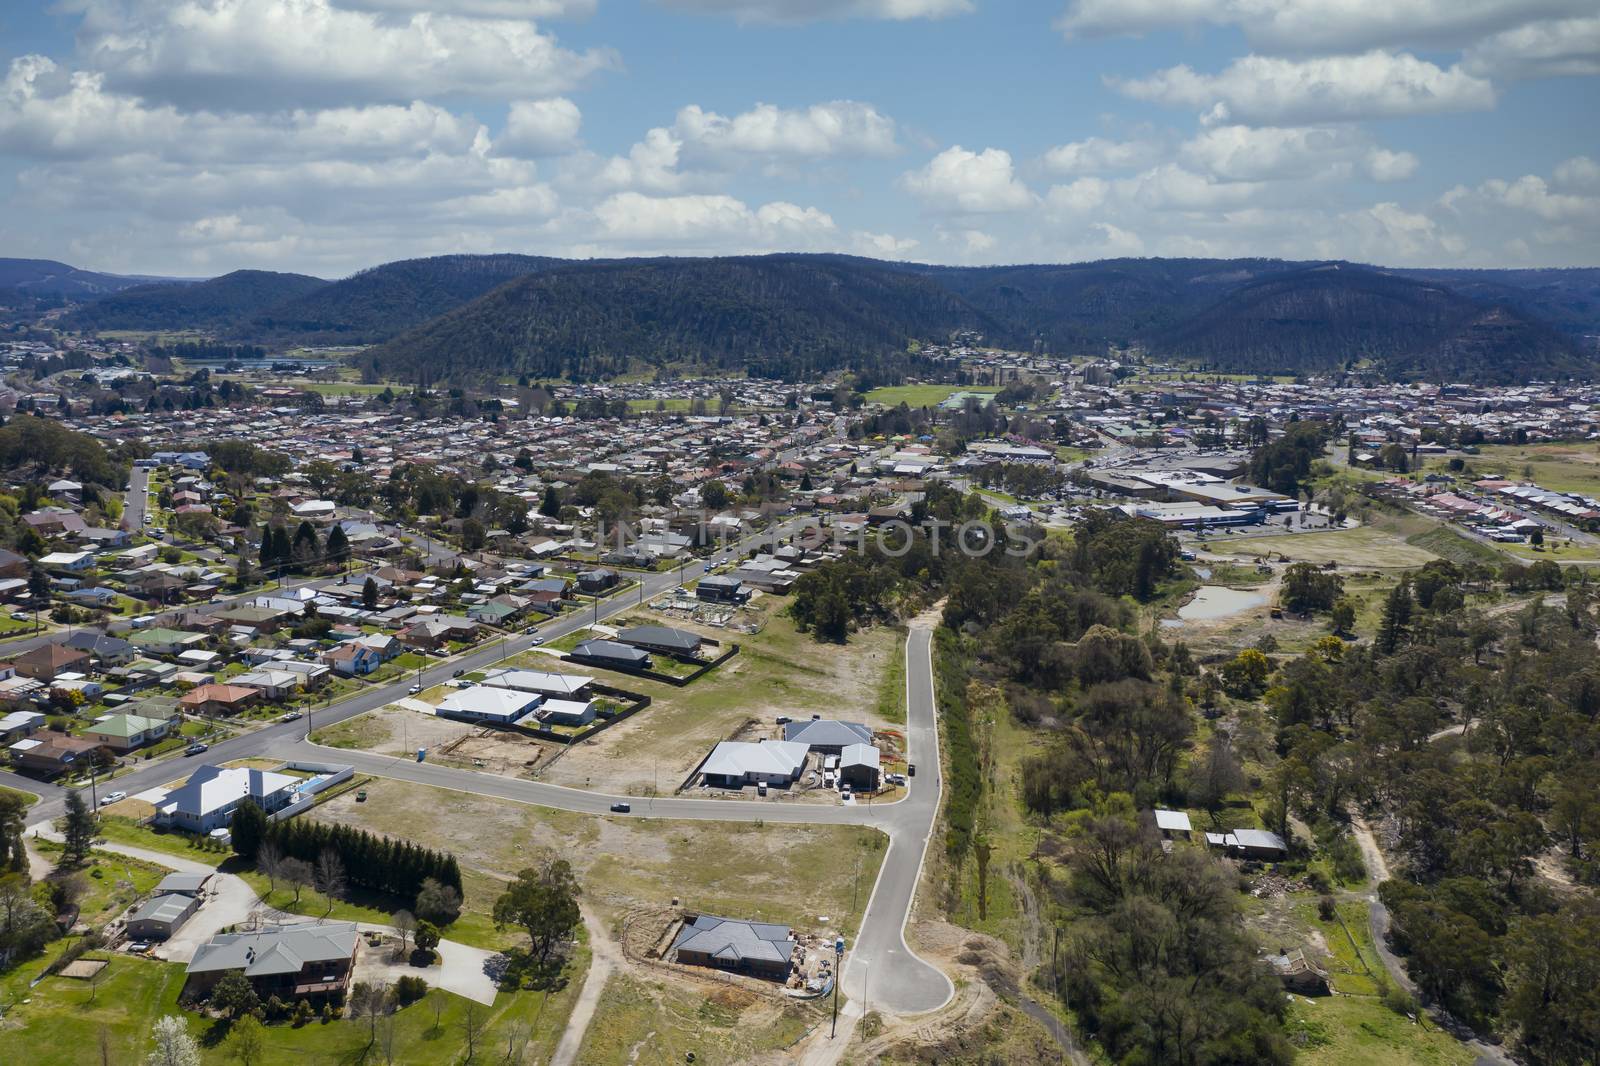 The township of Lithgow nestled in a valley in the Central Tablelands of New South Wales in Australia